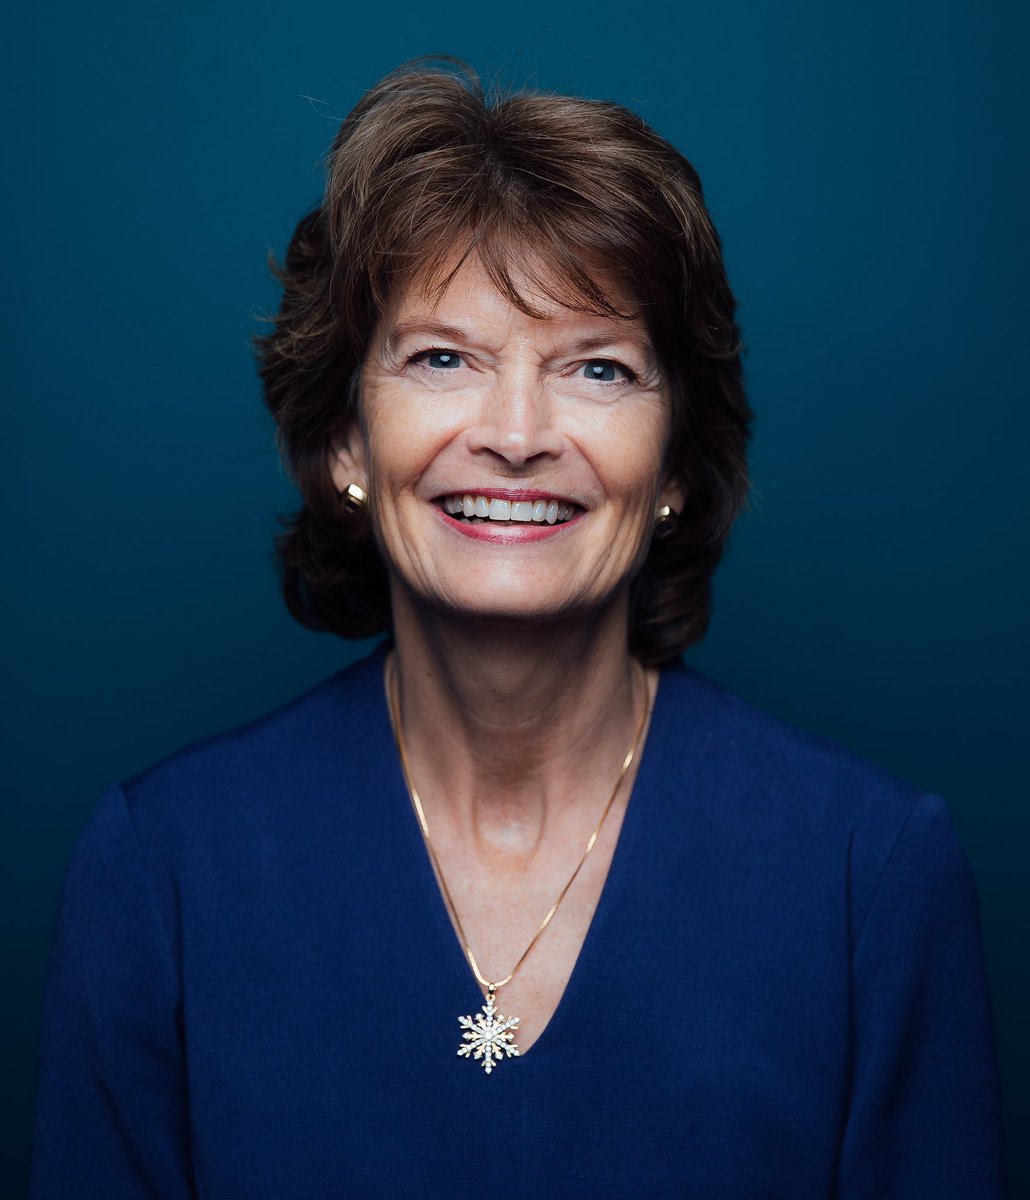 JUST IN: Alaska U.S. Senator @LisaMurkowski endorses Nikki Haley for President 🇺🇸

“America needs someone with the right values, vigor, and judgment to serve as our next President-and in this race, there is no one better than her.'